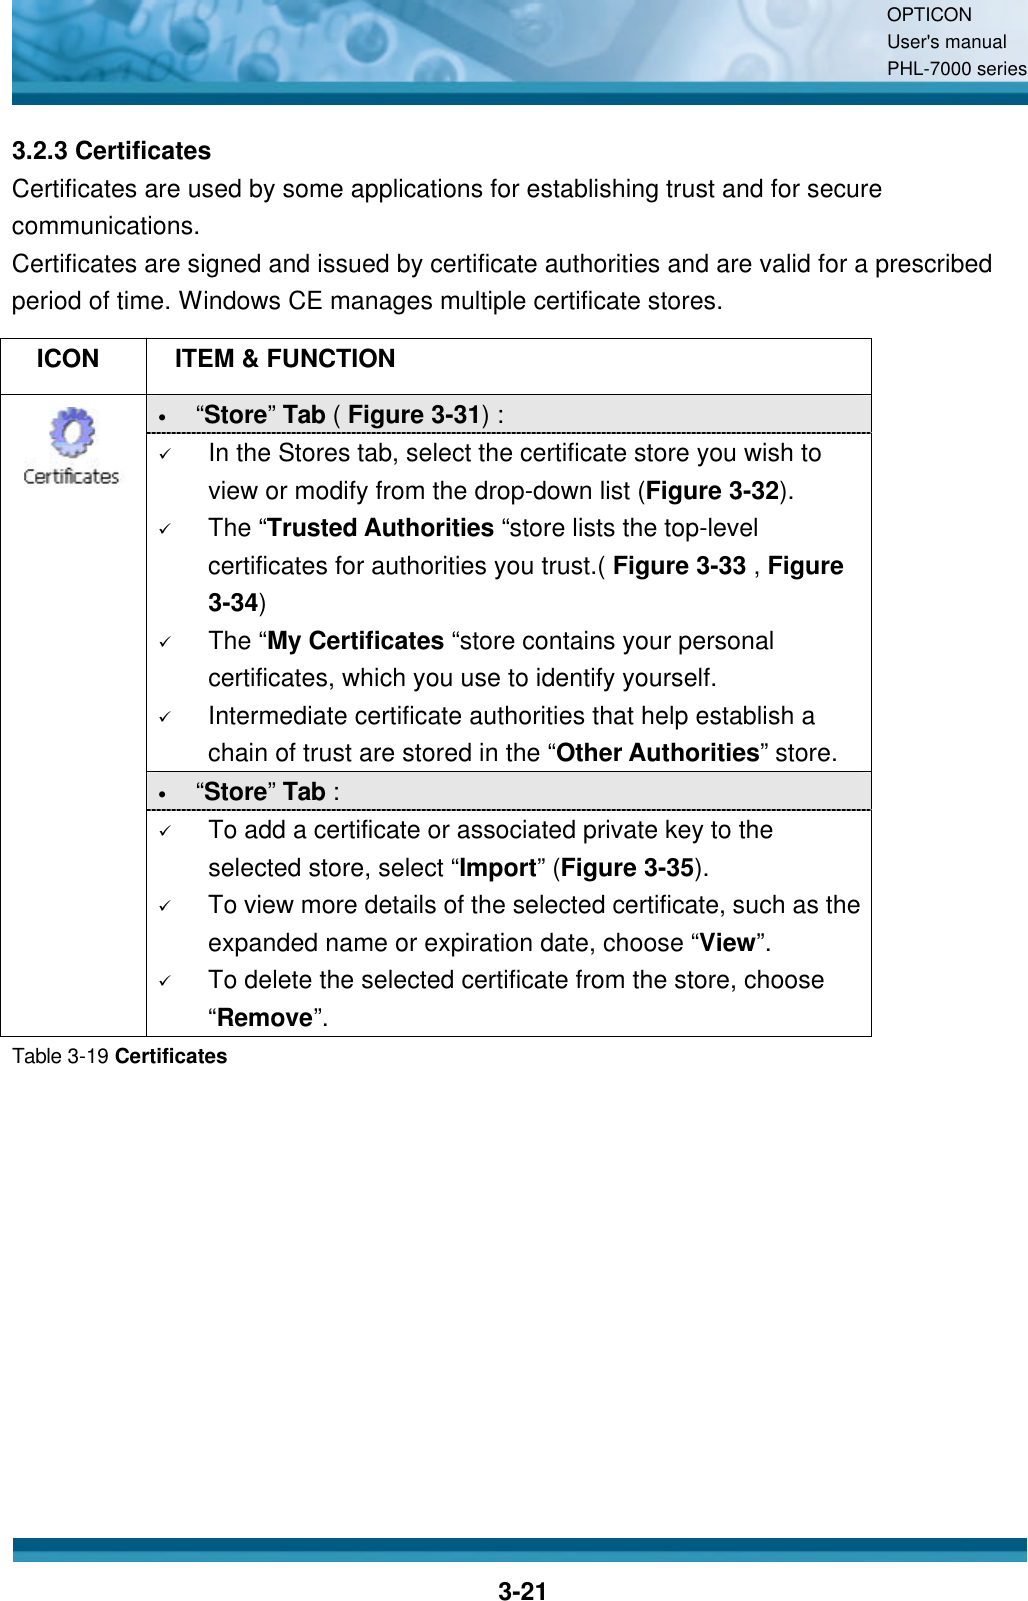 OPTICON User&apos;s manual PHL-7000 series    3-21 3.2.3 Certificates Certificates are used by some applications for establishing trust and for secure communications. Certificates are signed and issued by certificate authorities and are valid for a prescribed period of time. Windows CE manages multiple certificate stores.    ICON  ITEM &amp; FUNCTION • “Store”  Tab ( Figure 3-31) :   ü In the Stores tab, select the certificate store you wish to view or modify from the drop-down list (Figure 3-32).  ü The “Trusted Authorities “store lists the top-level certificates for authorities you trust.( Figure 3-33 , Figure 3-34)  ü The “My Certificates “store contains your personal certificates, which you use to identify yourself.  ü Intermediate certificate authorities that help establish a chain of trust are stored in the “Other Authorities” store. • “Store”  Tab :    ü To add a certificate or associated private key to the selected store, select “Import” (Figure 3-35). ü To view more details of the selected certificate, such as the expanded name or expiration date, choose “View”.  ü To delete the selected certificate from the store, choose “Remove”.  Table 3-19 Certificates   